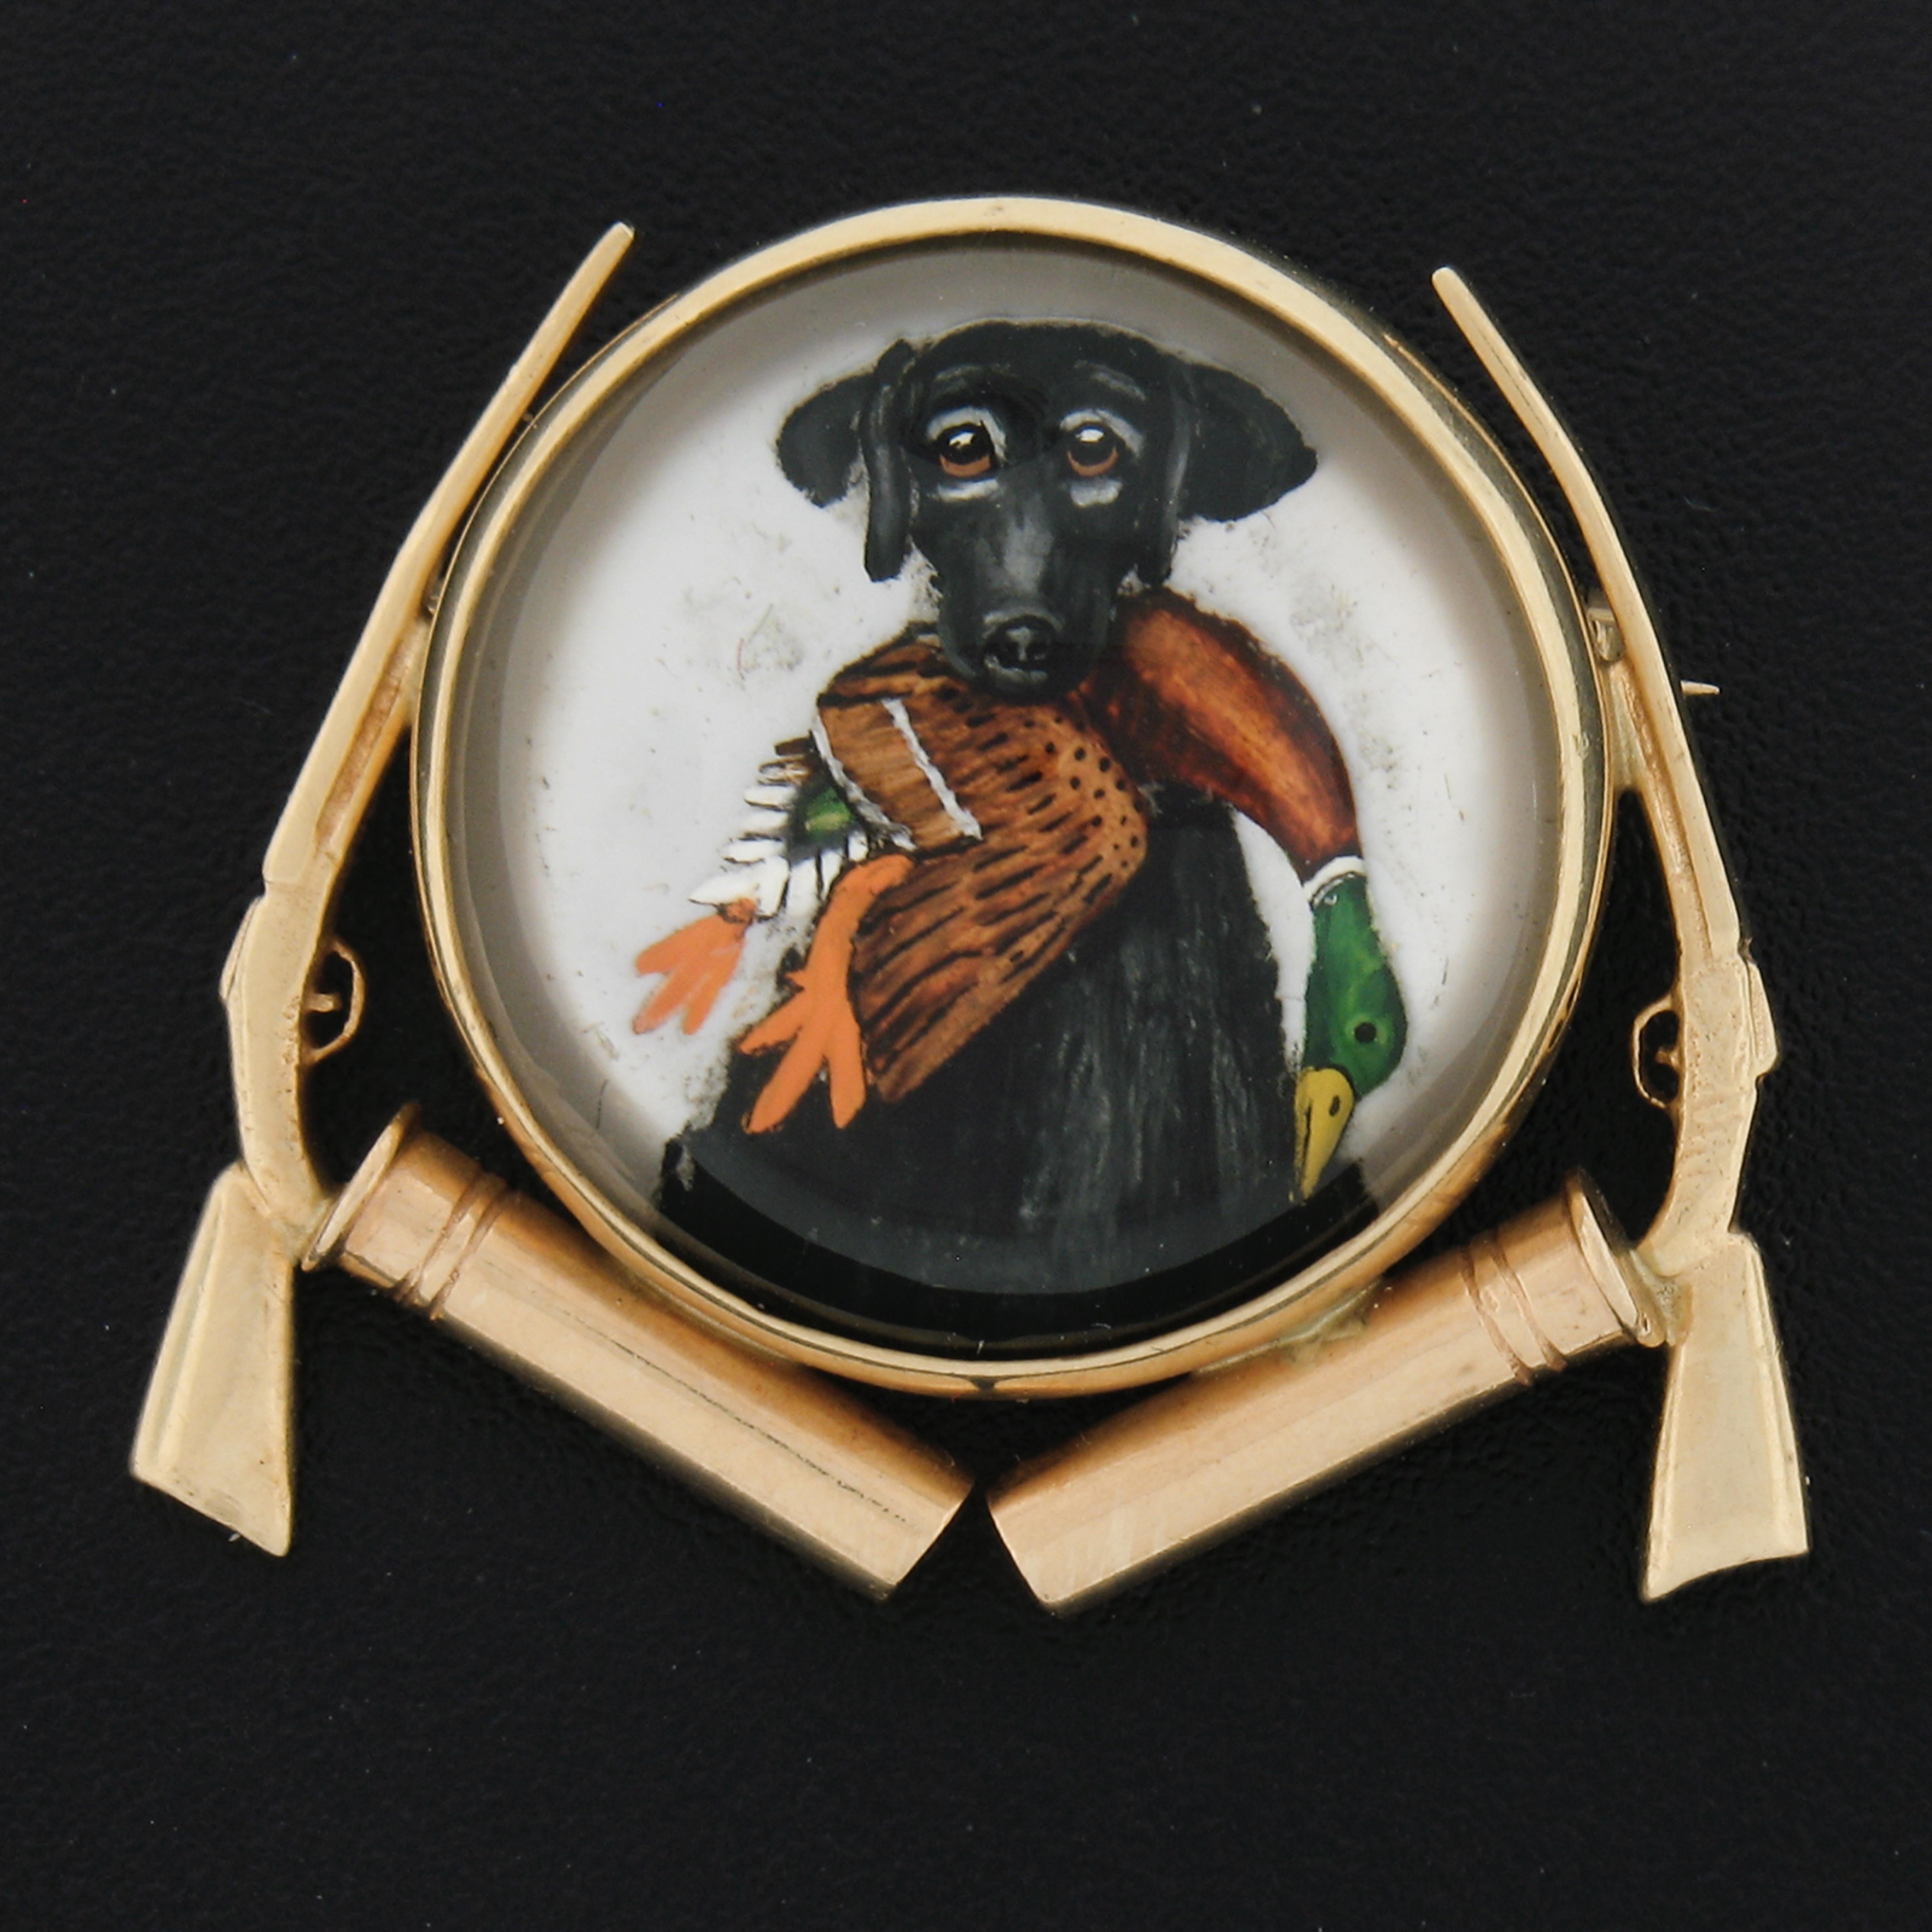 This magnificent vintage brooch was crafted from solid 14k yellow gold. It features an incredibly detailed reverse painted intaglio of a hunting scene with dog holding a duck in mouth. This substnatial brooch displays outstandingly detailed work and